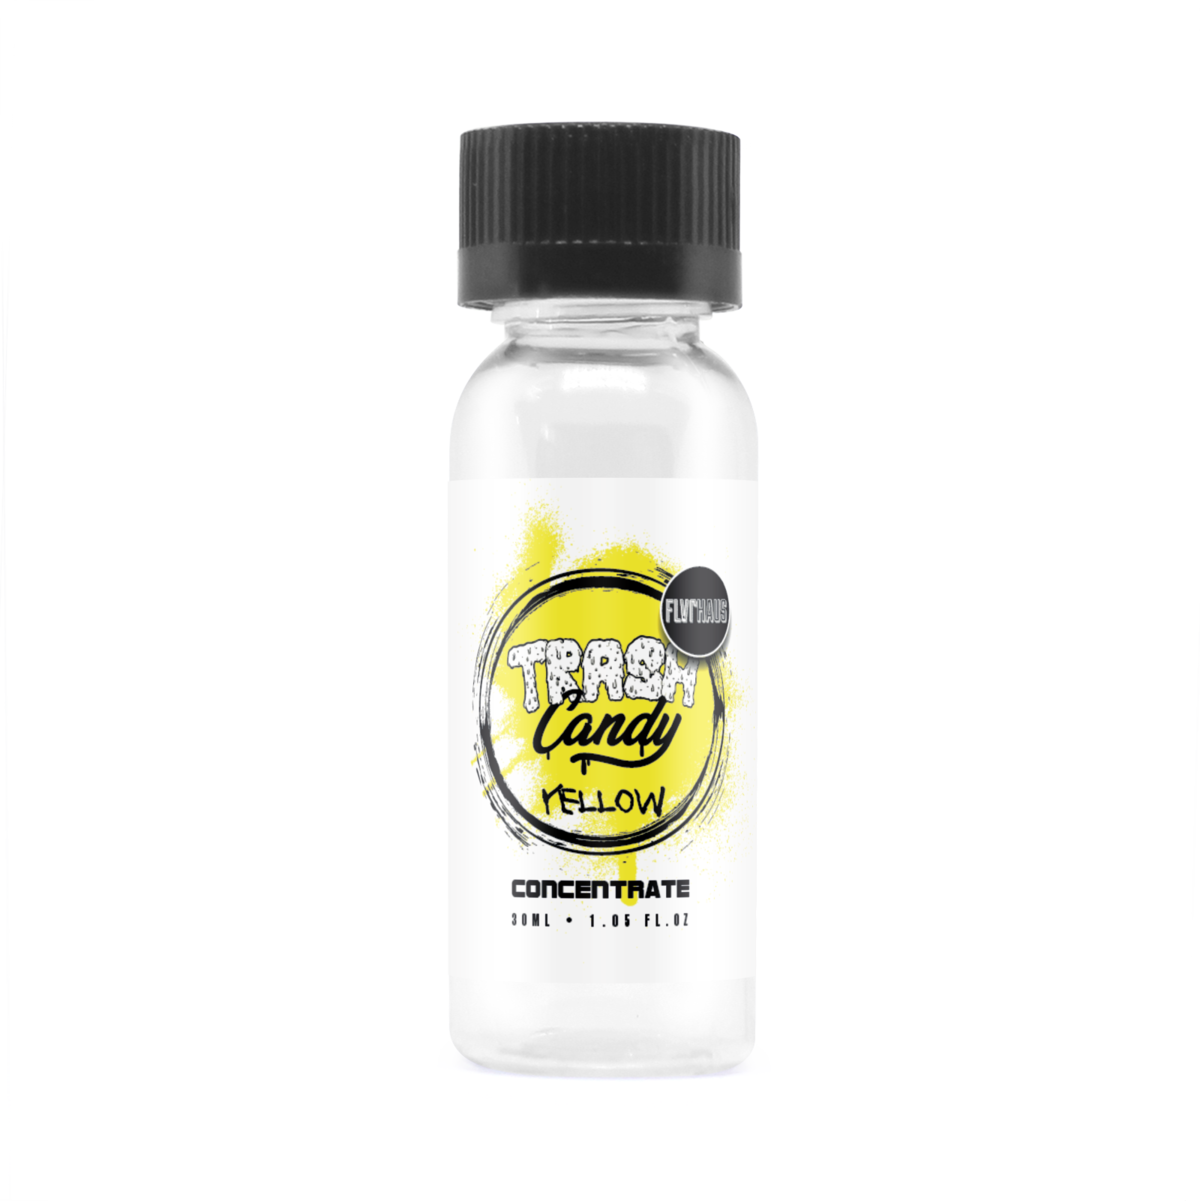 Yellow Concentrate E-liquid by Trash Candy 30ml